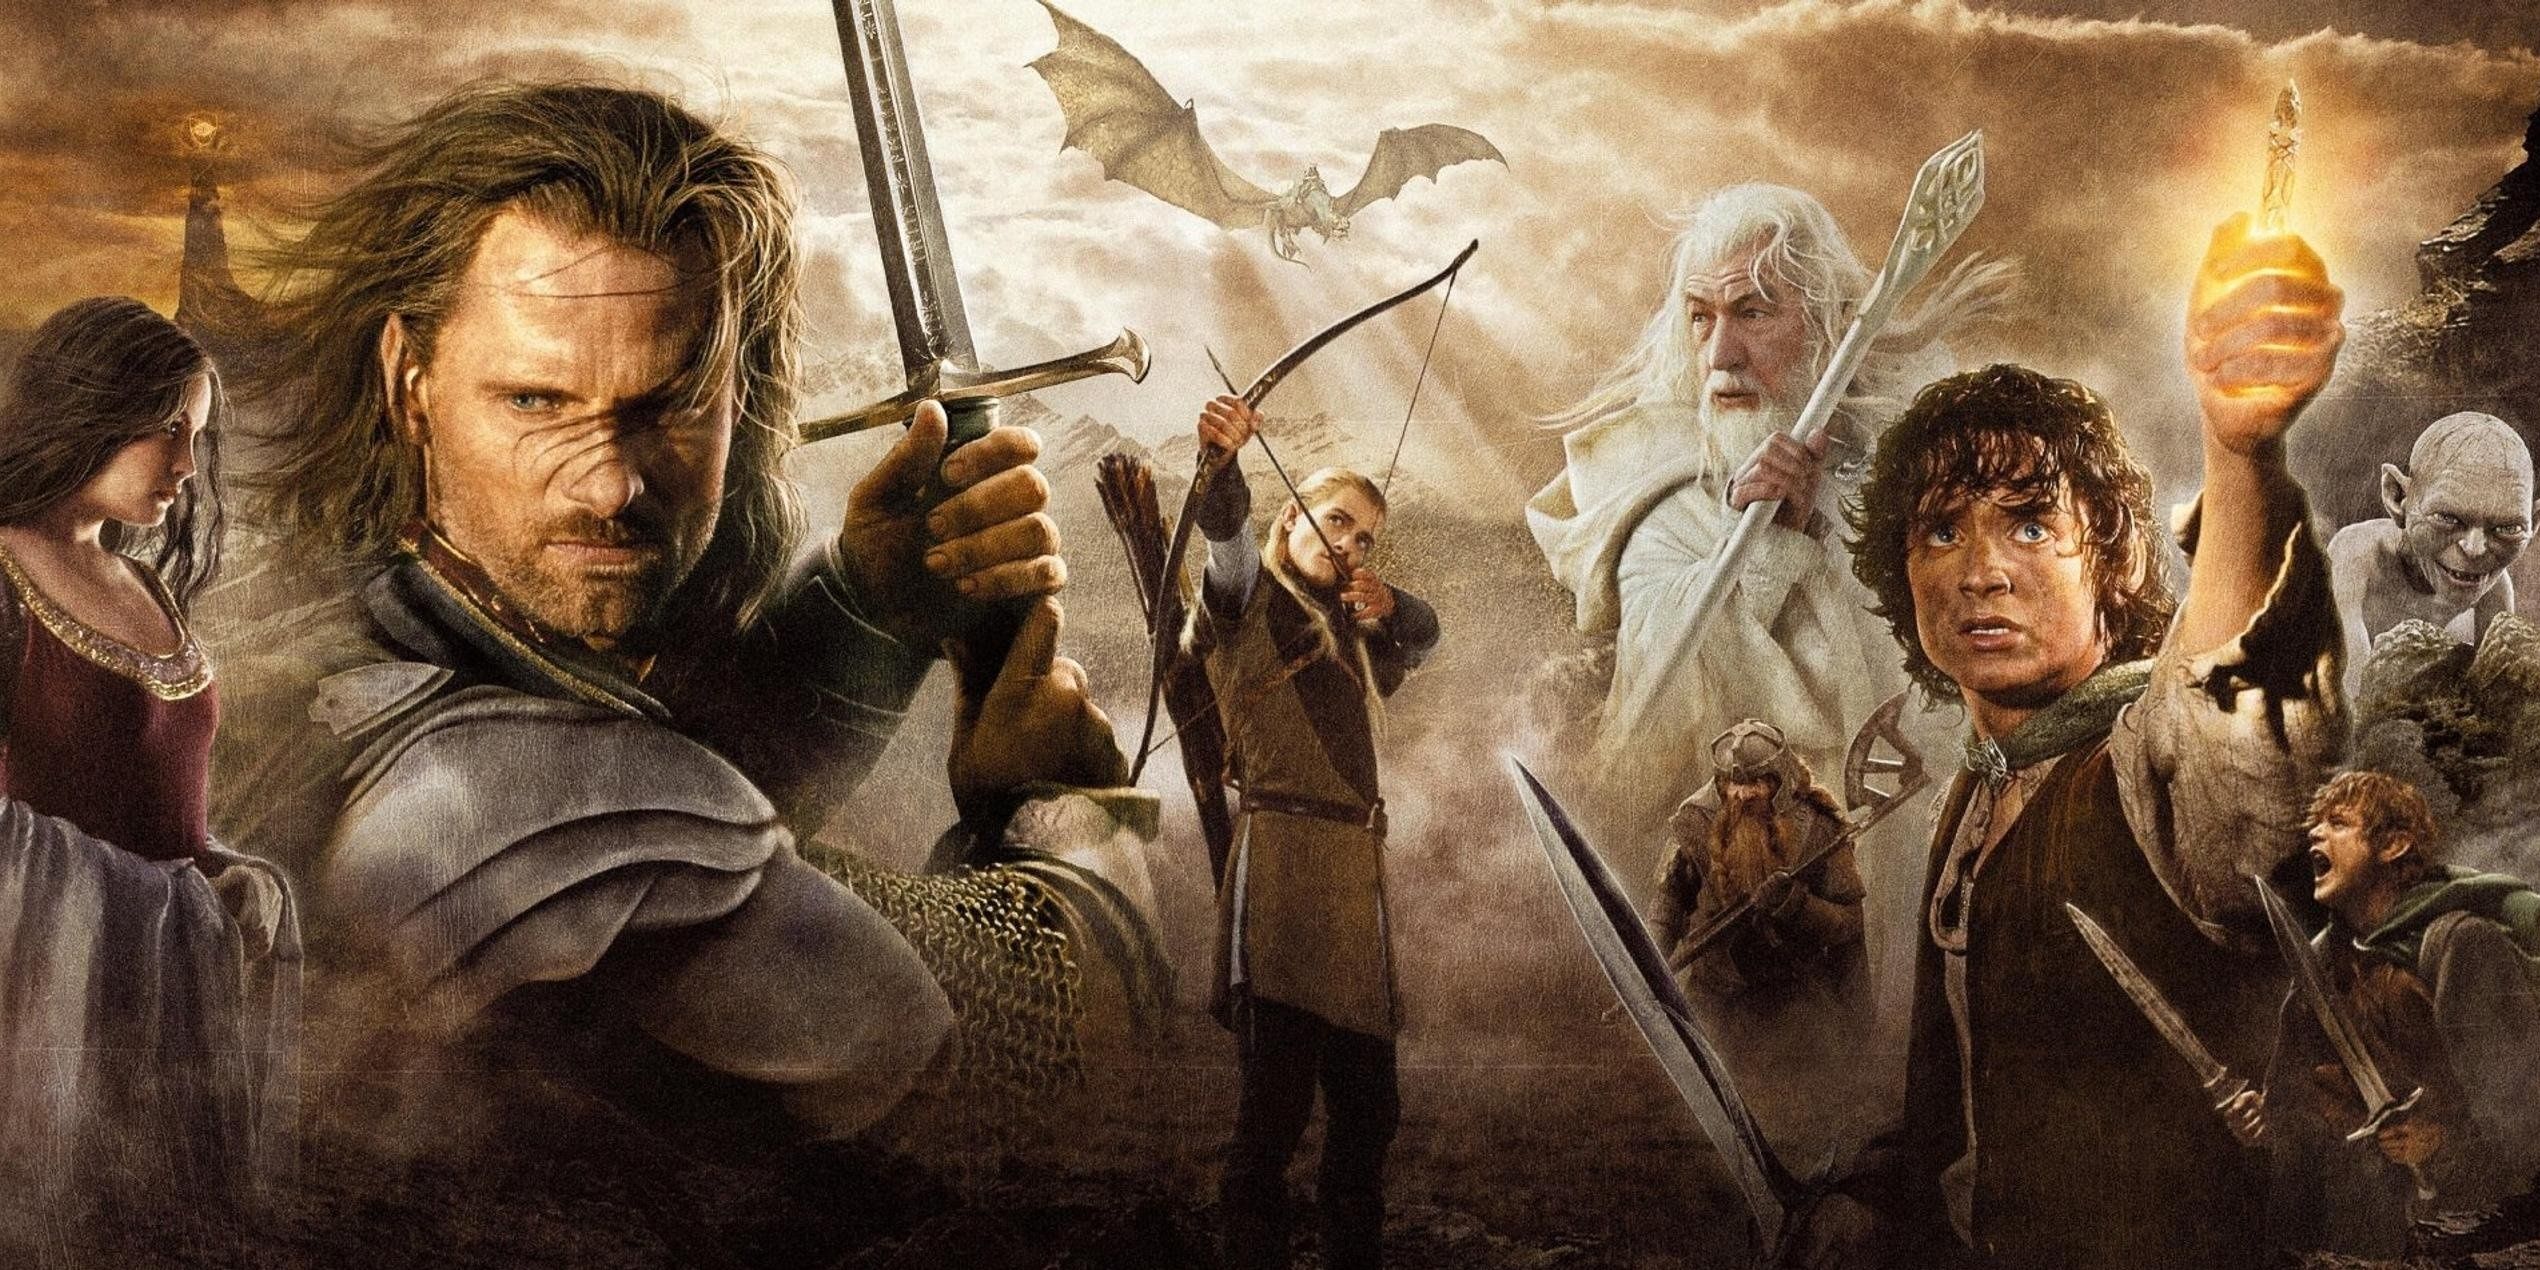 Lord of the Rings & Hobbit Trilogies Releasing On 4K For The First Time